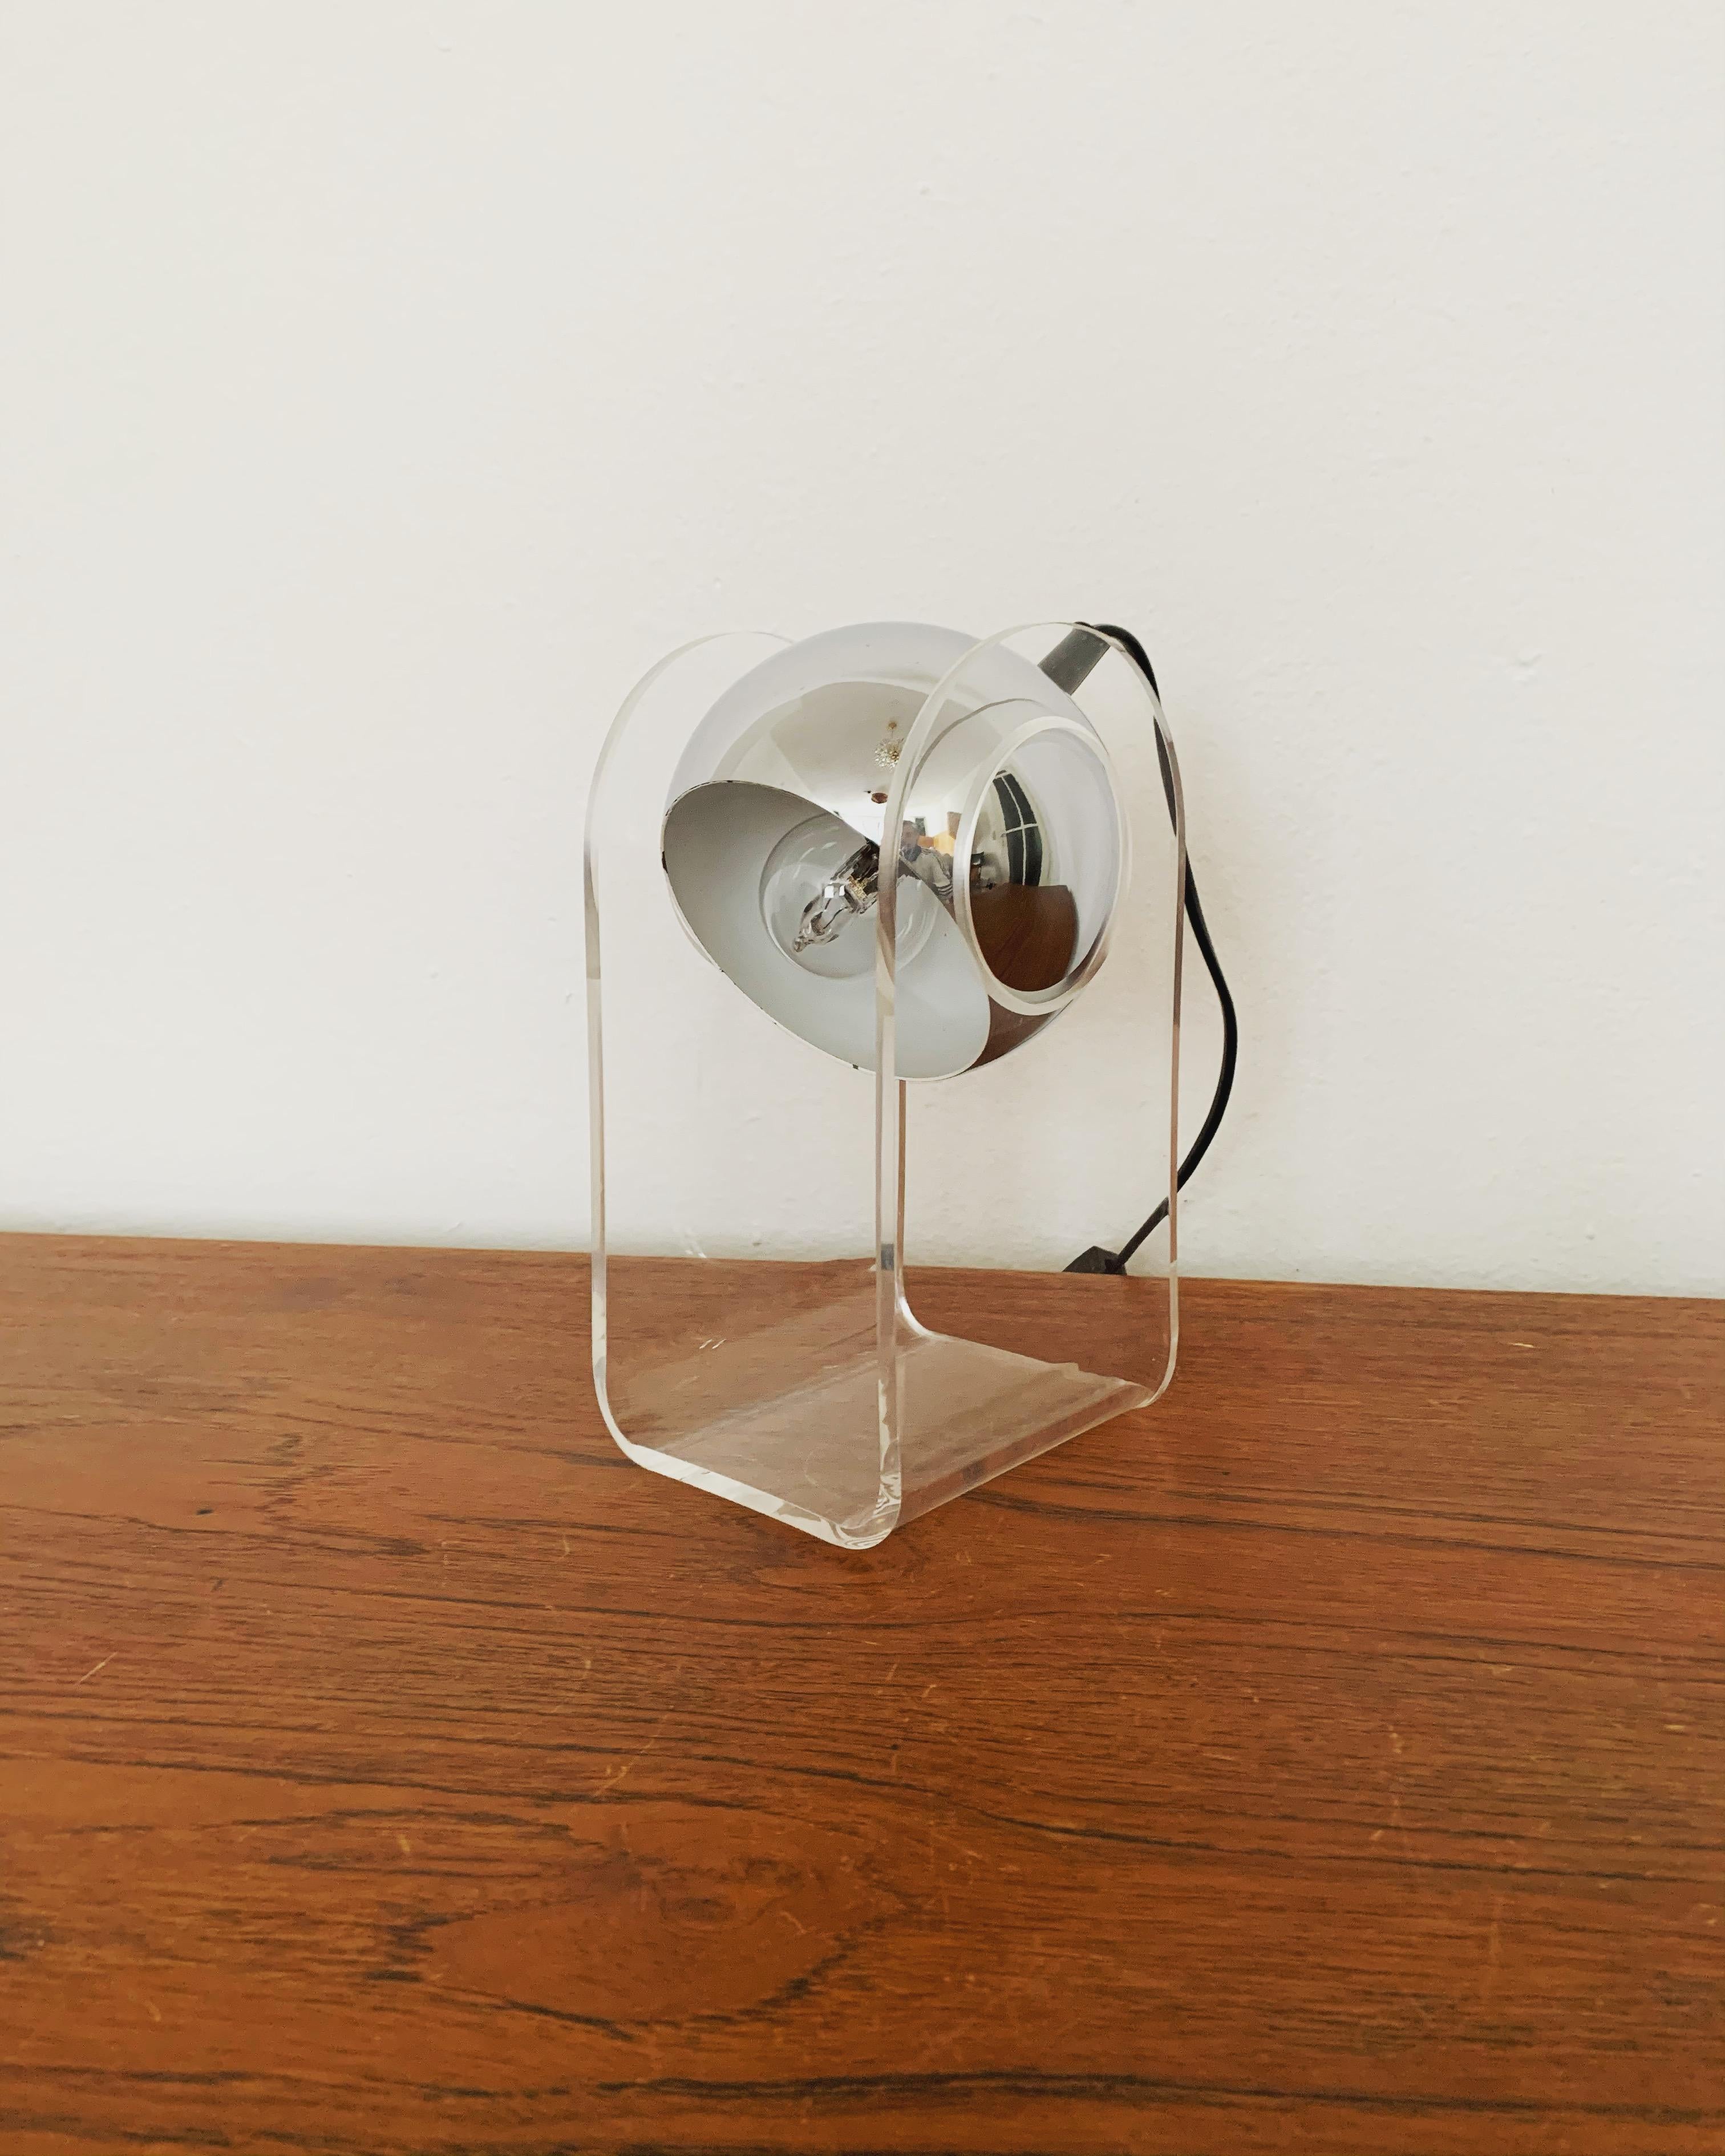 Wonderful Plexiglas table lamp from the 1970s.
Very good workmanship and unusual design.
The swiveling head creates different lighting moods.

Condition:

Very good vintage condition with slight signs of wear consistent with age.
Slight signs